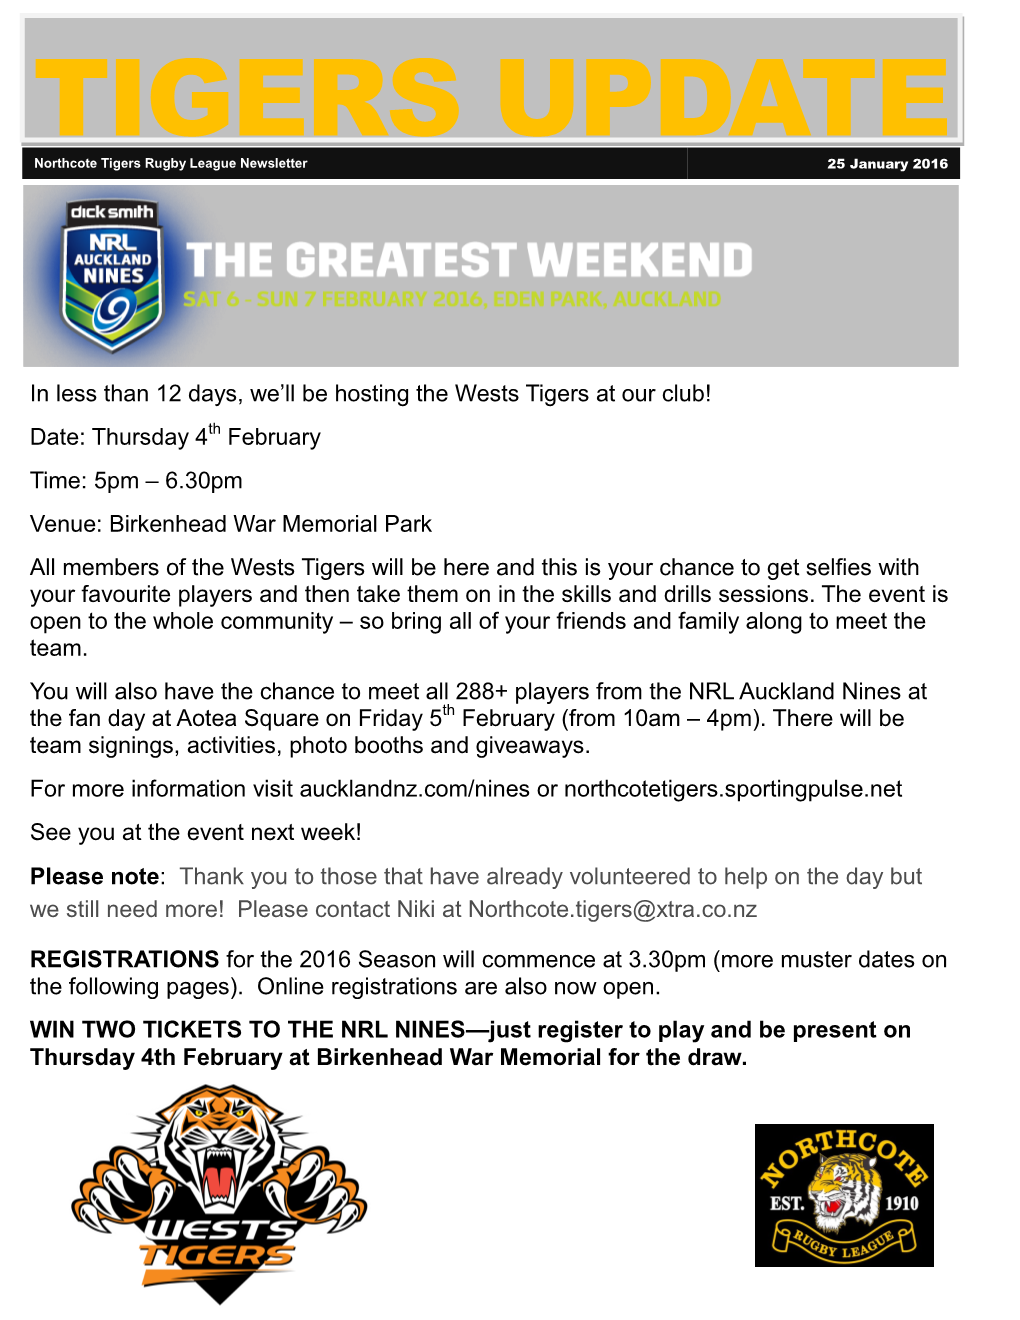 TIGERS UPDATE Northcote Tigers Rugby League Newsletter 25 January 2016